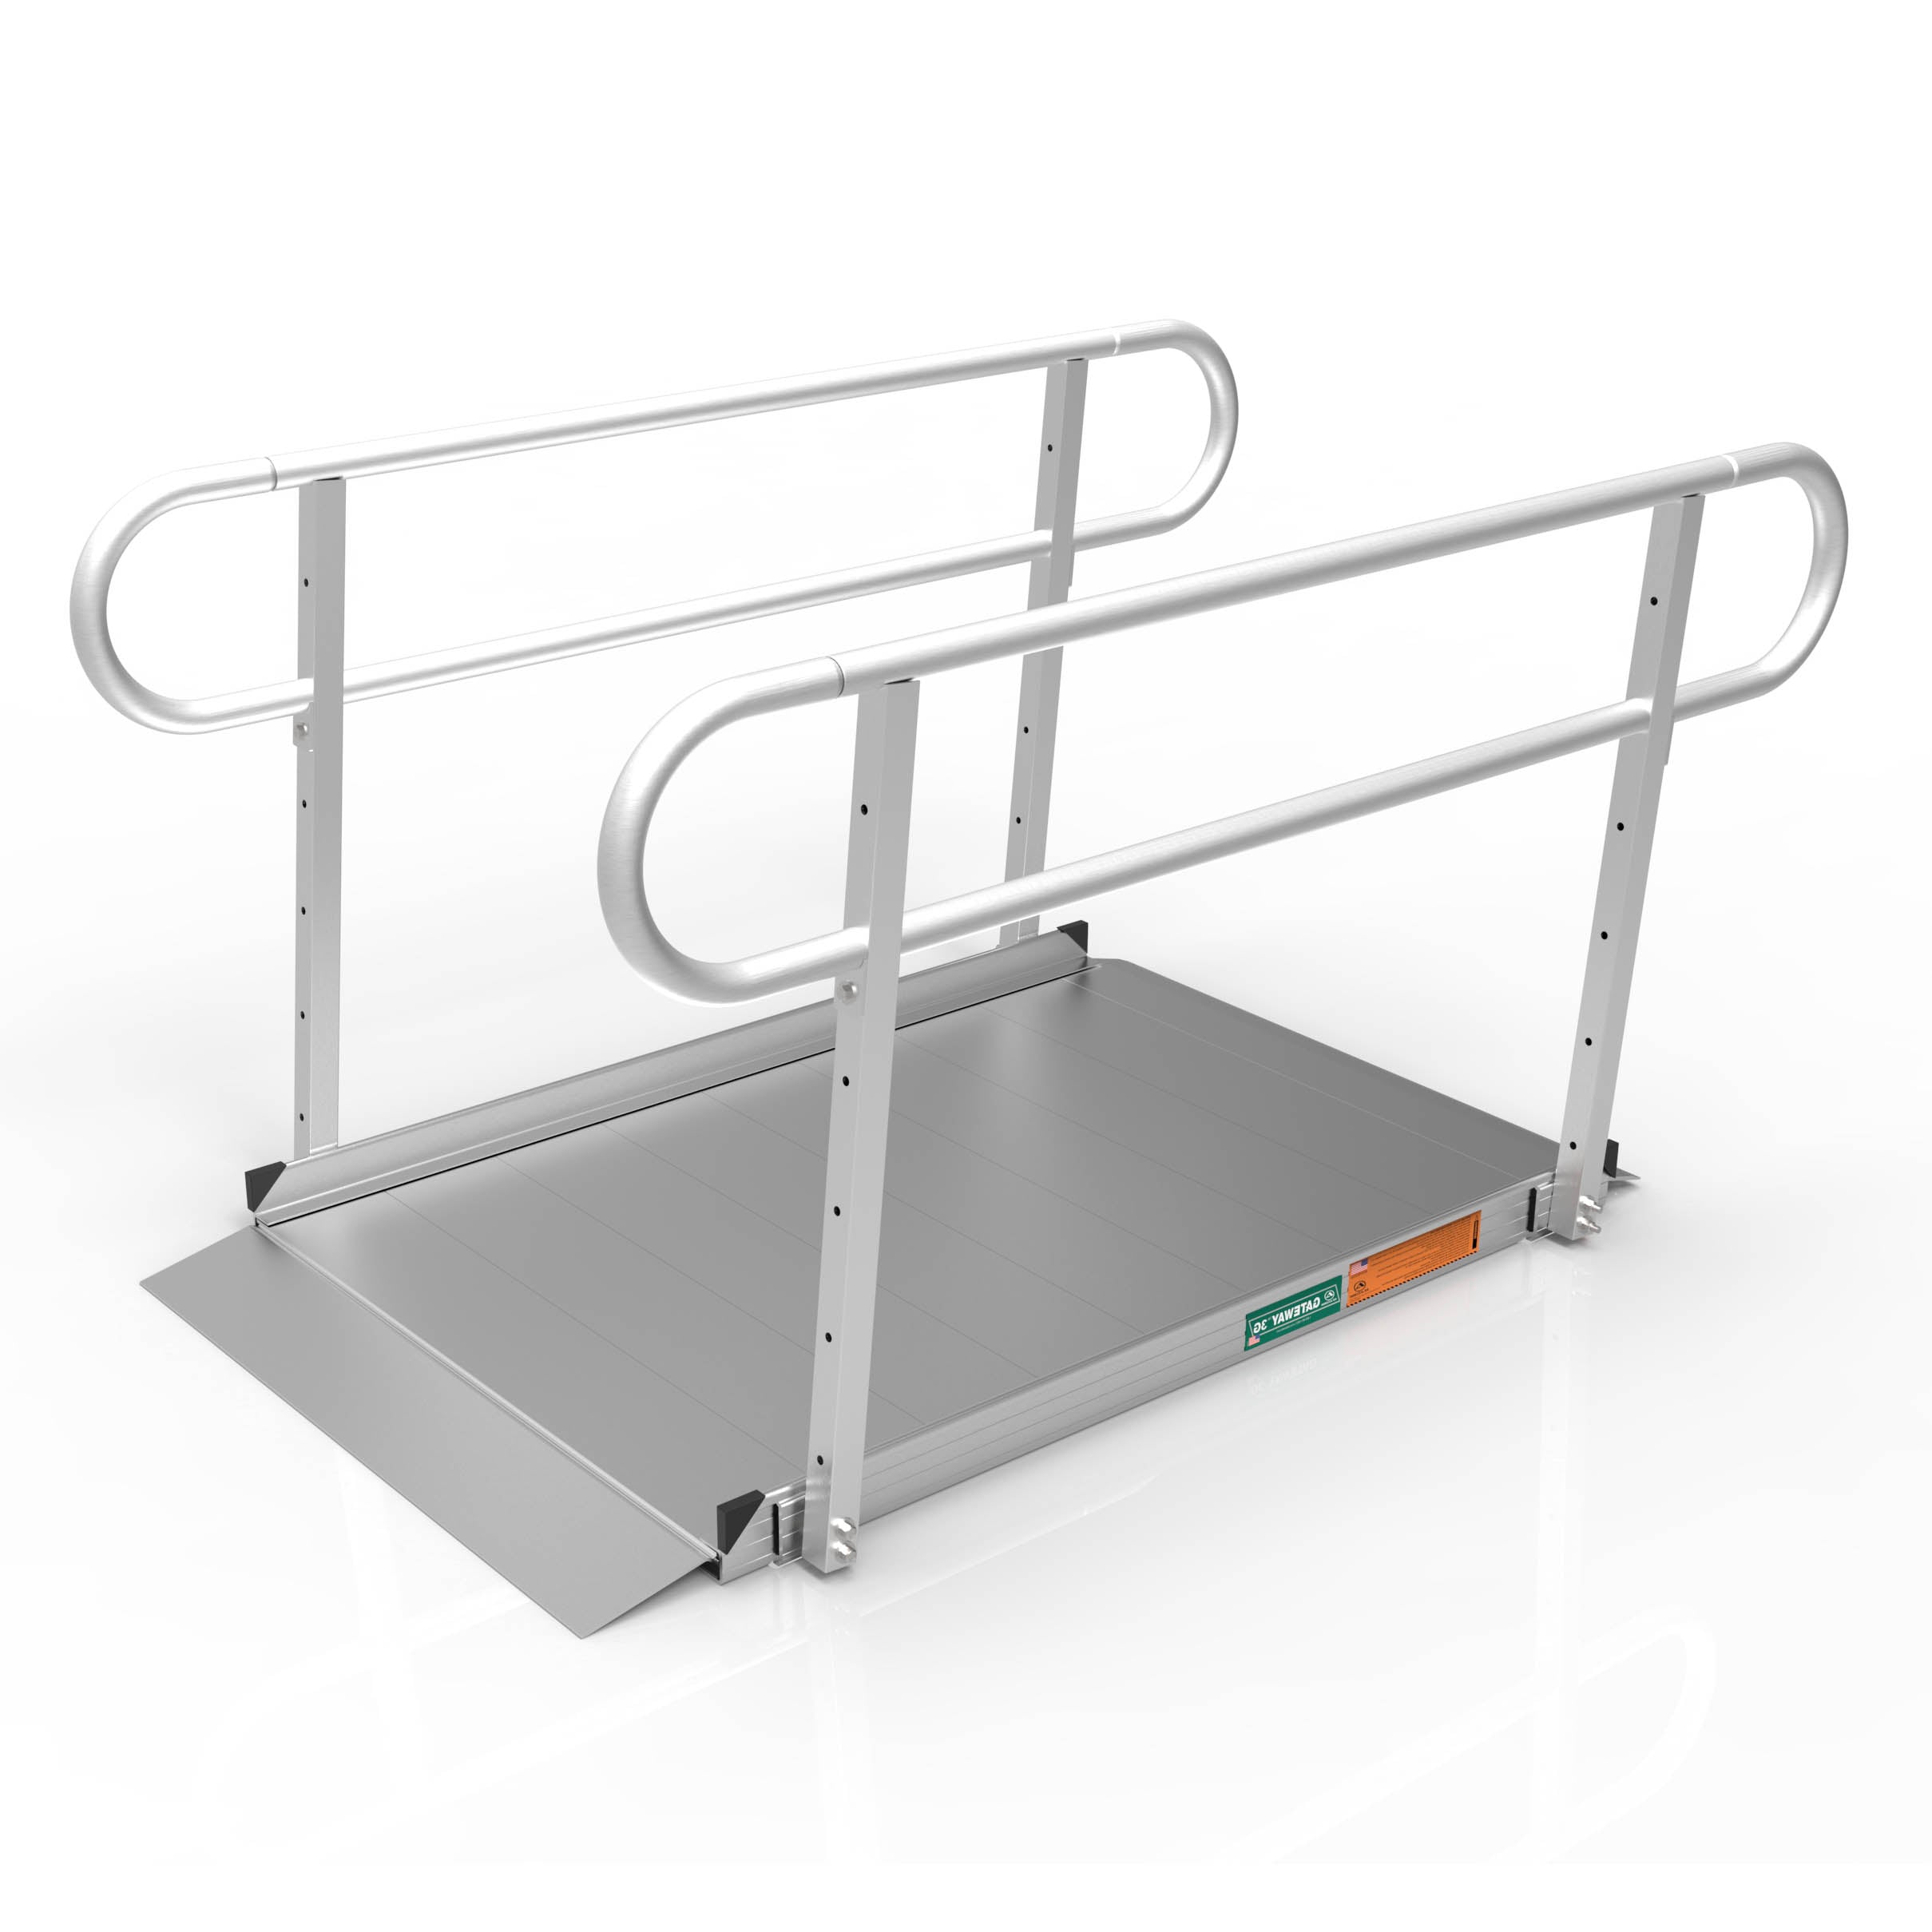 EZ-ACCESS® GATEWAY™ 3G Solid Surface Portable Ramp (Two-Line Handrails) 4 Foot